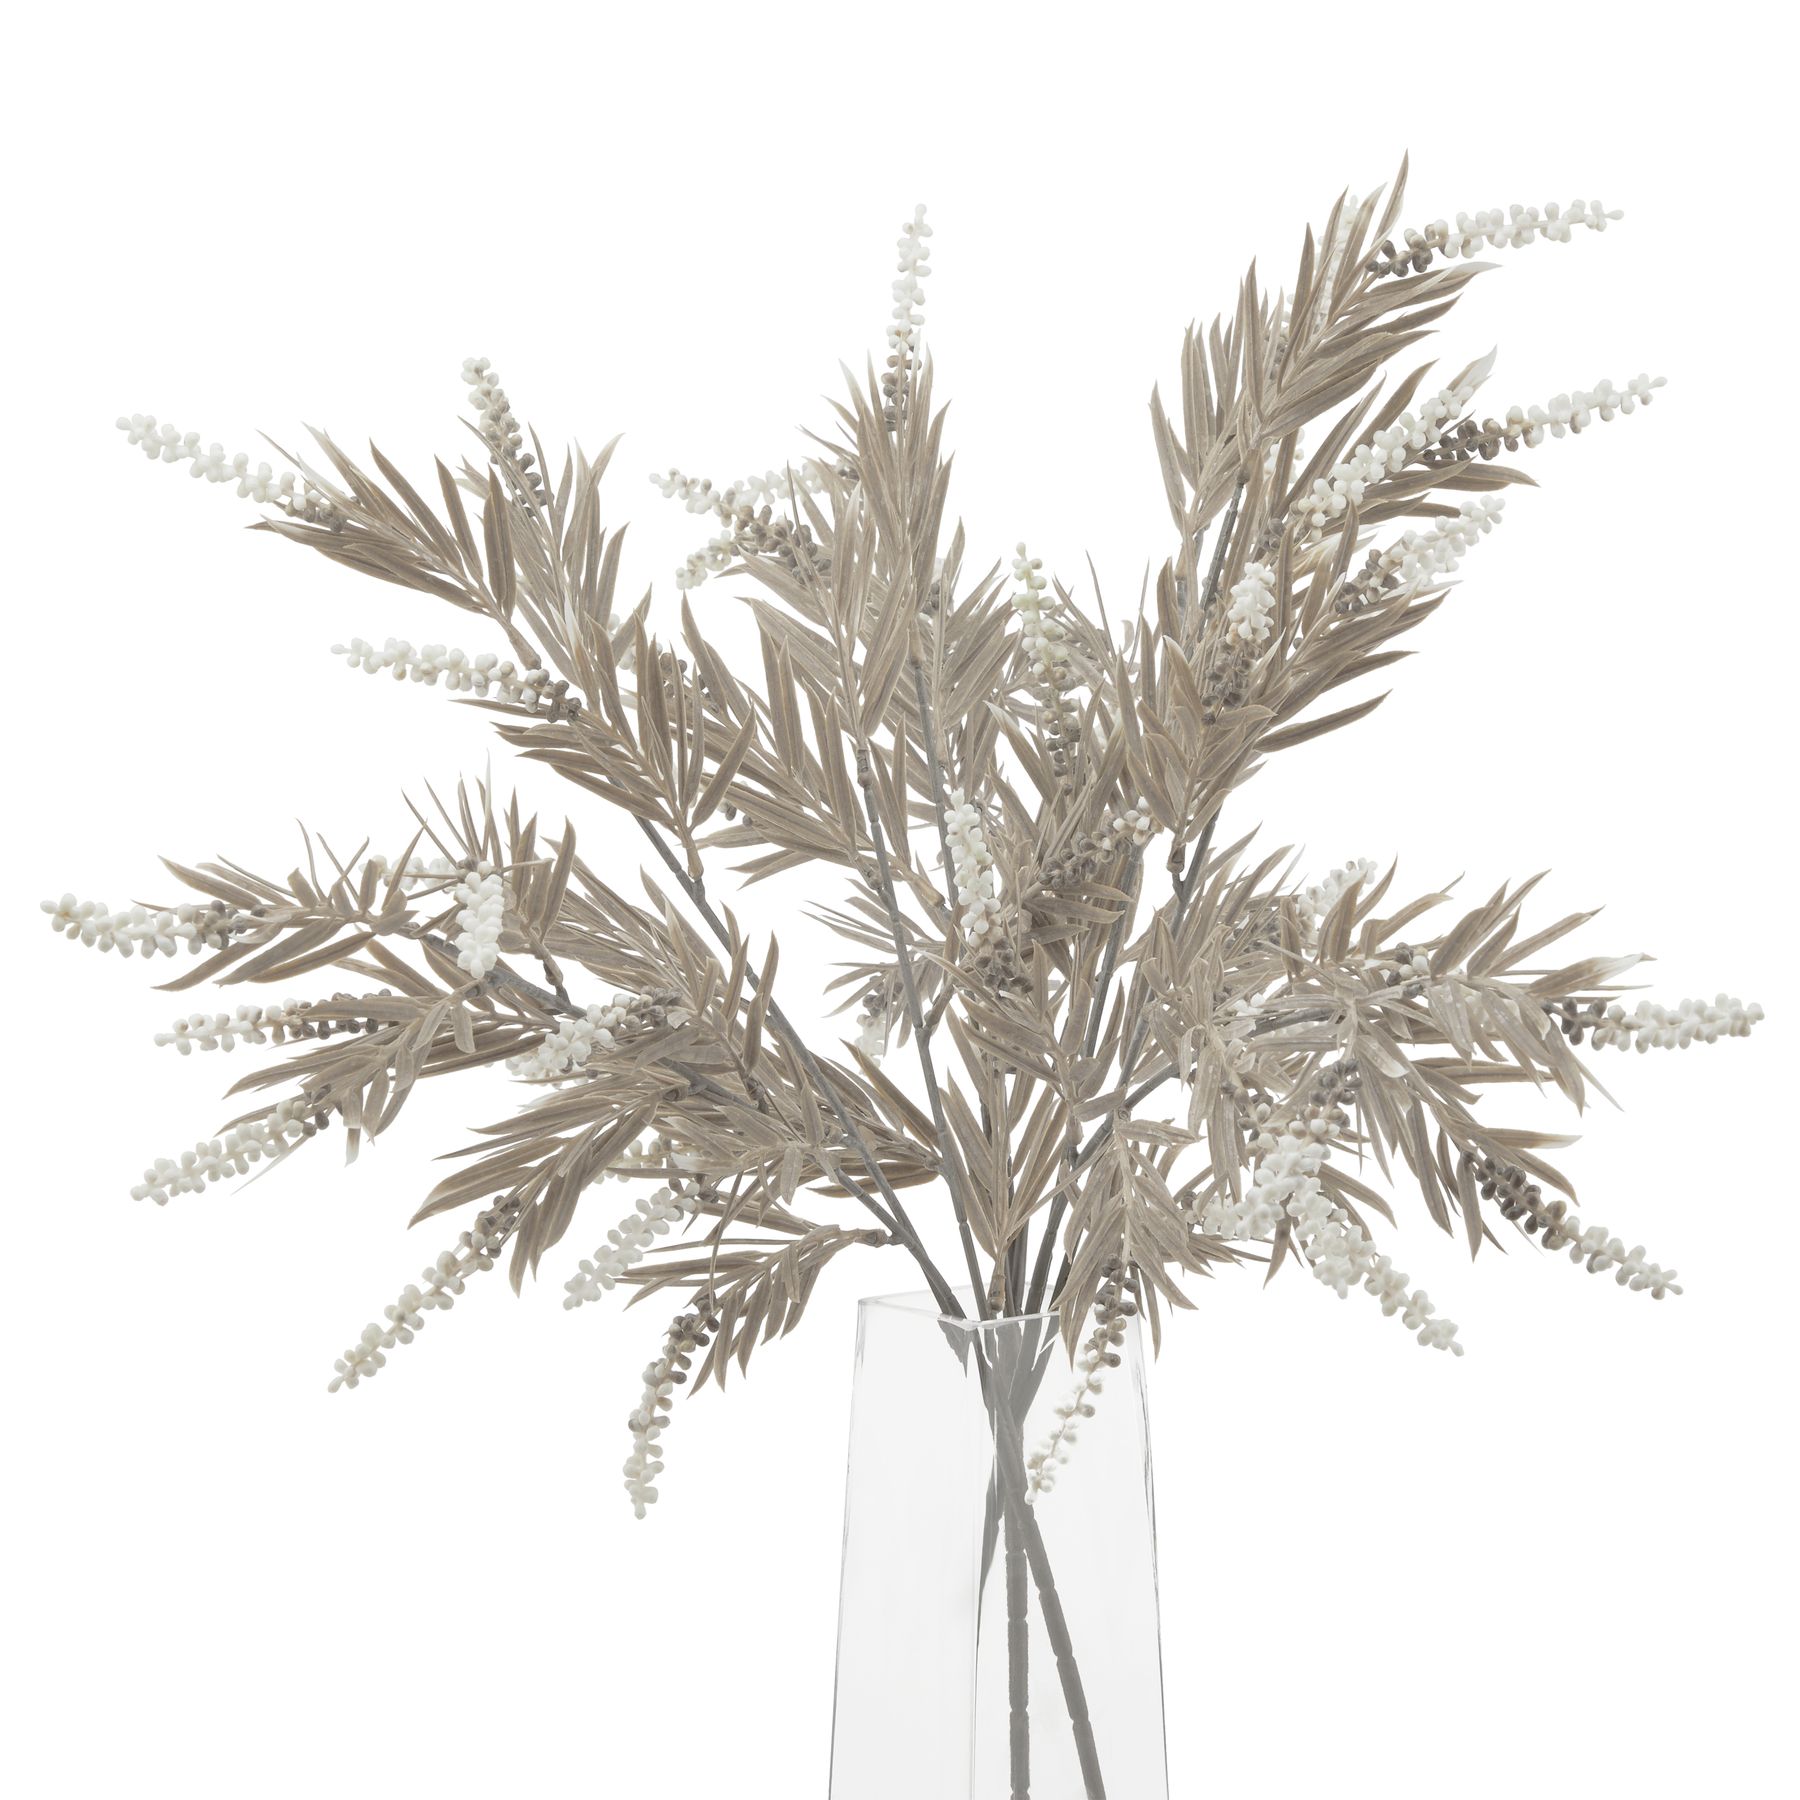 Taupe and Ivory Large Branch - Image 1